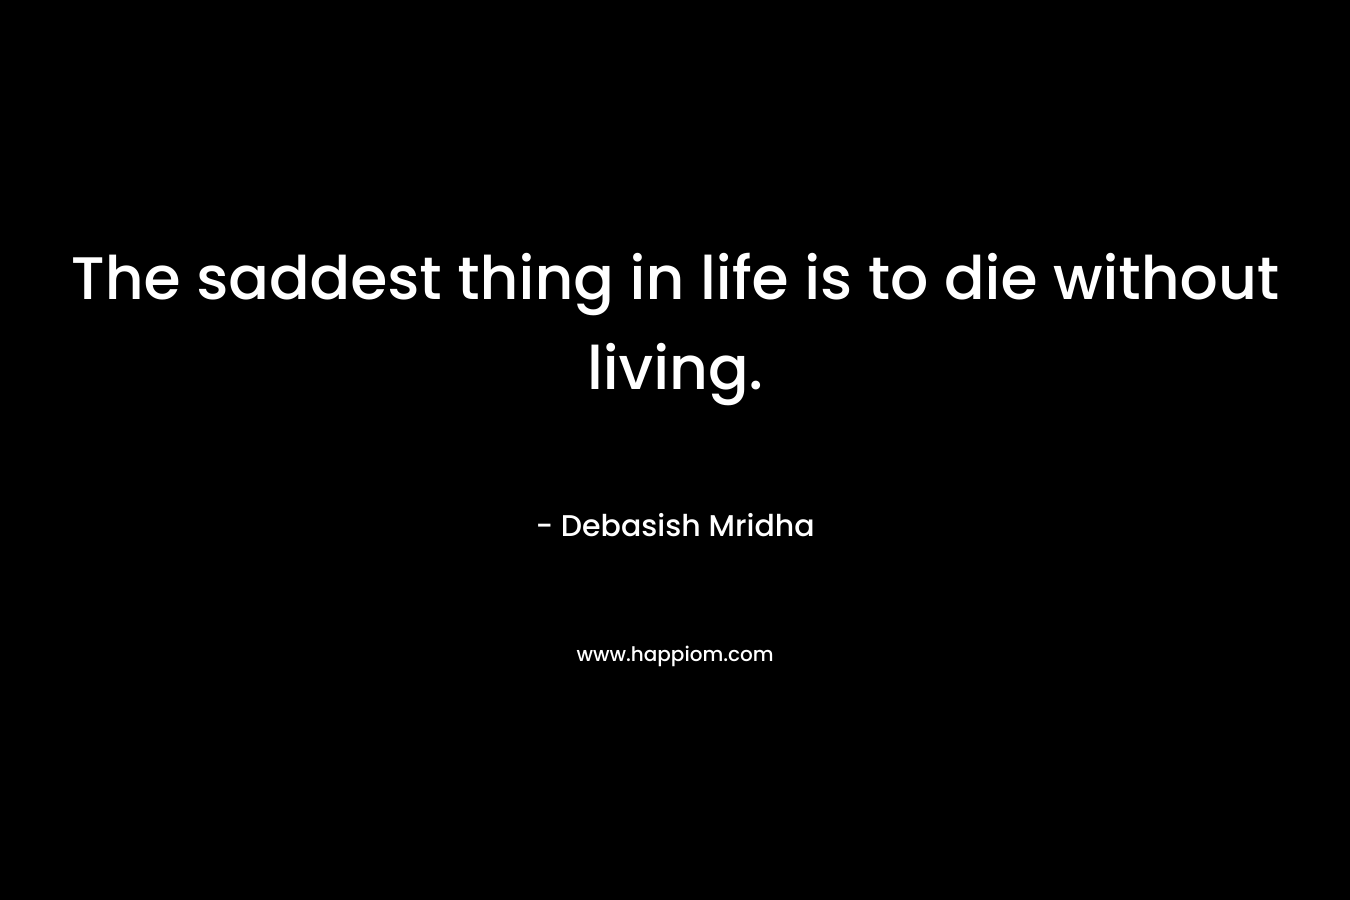 The saddest thing in life is to die without living.